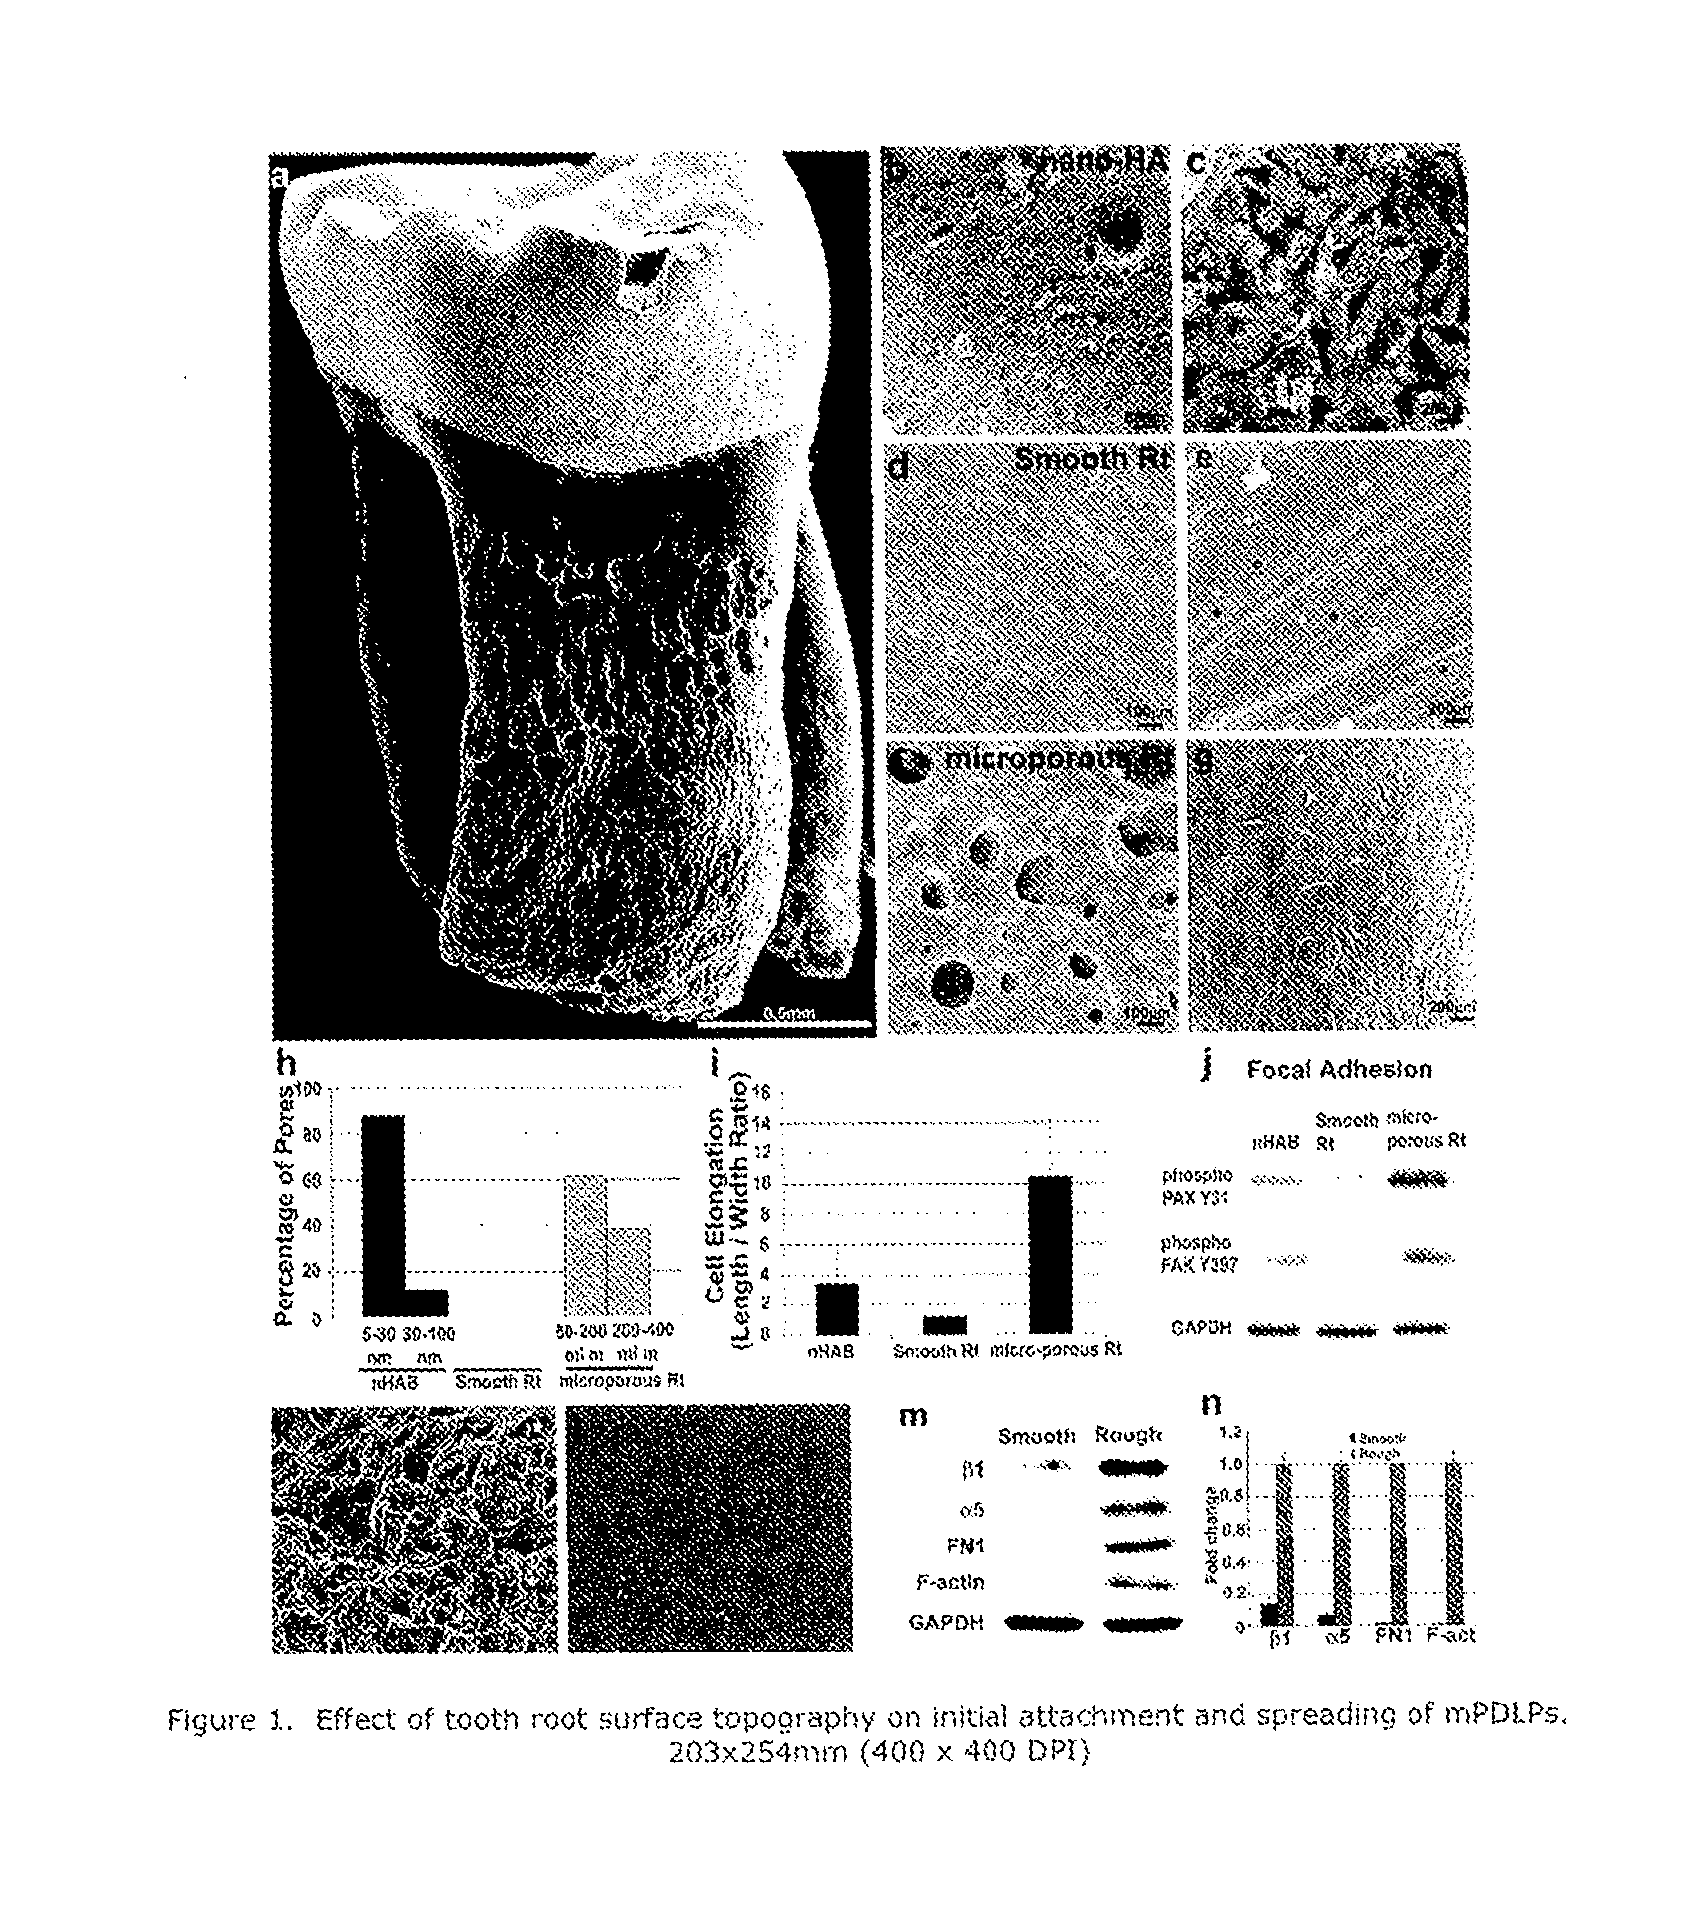 Reagents and methods for preparing teeth for implantation